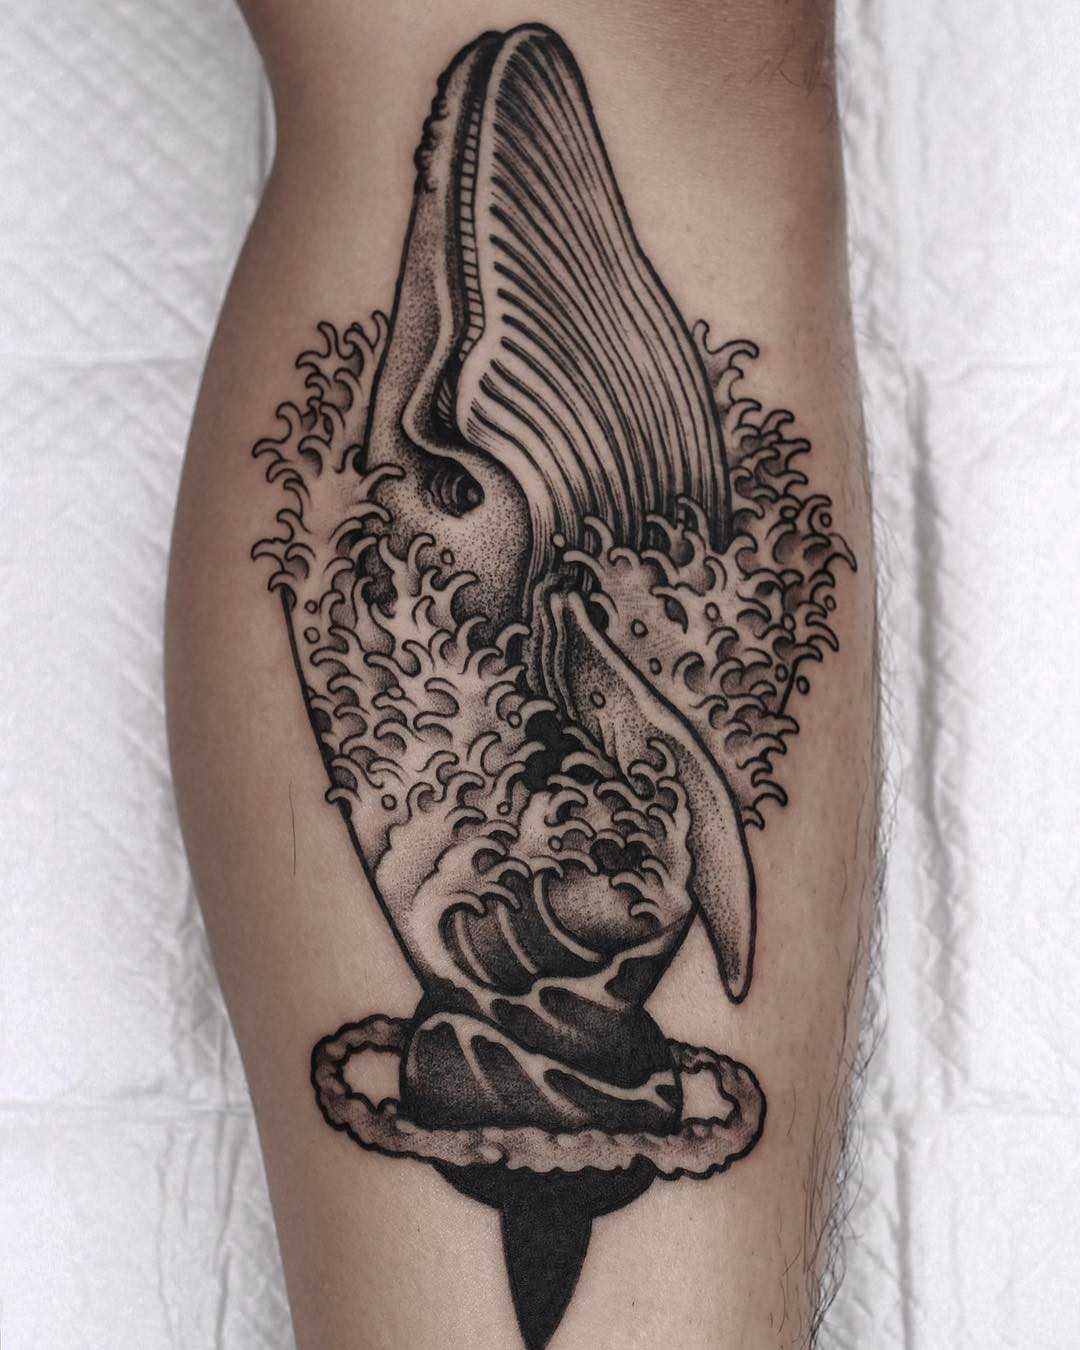 Whale done at High Tension Tattoo